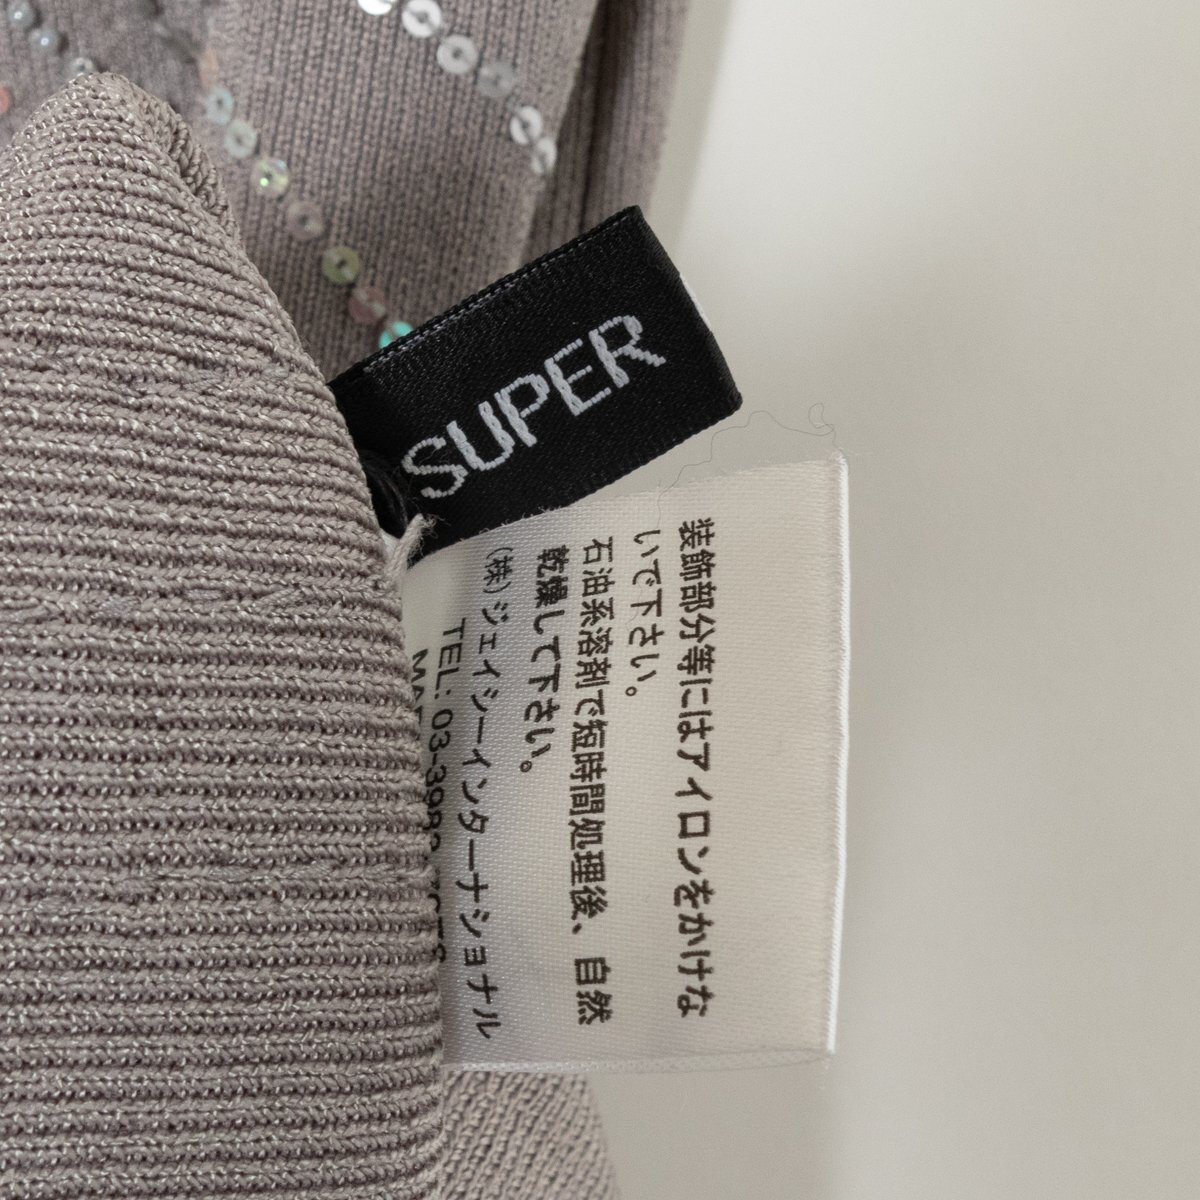  mail service 0 Super Beauty super view ti spangled attaching no sleeve tank top 42 rayon gray beautiful . casual 